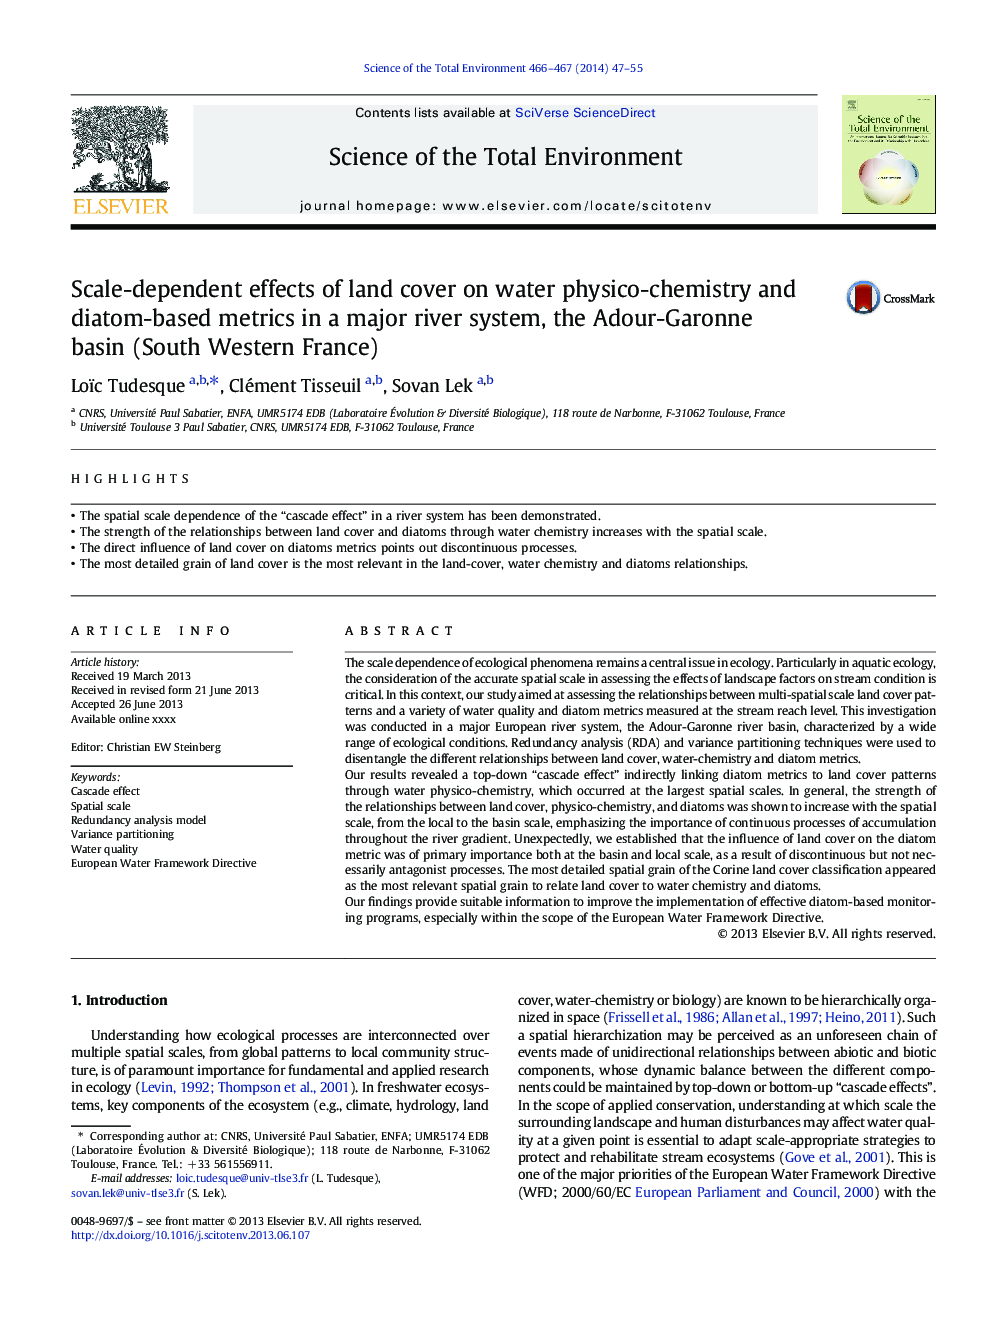 Scale-dependent effects of land cover on water physico-chemistry and diatom-based metrics in a major river system, the Adour-Garonne basin (South Western France)